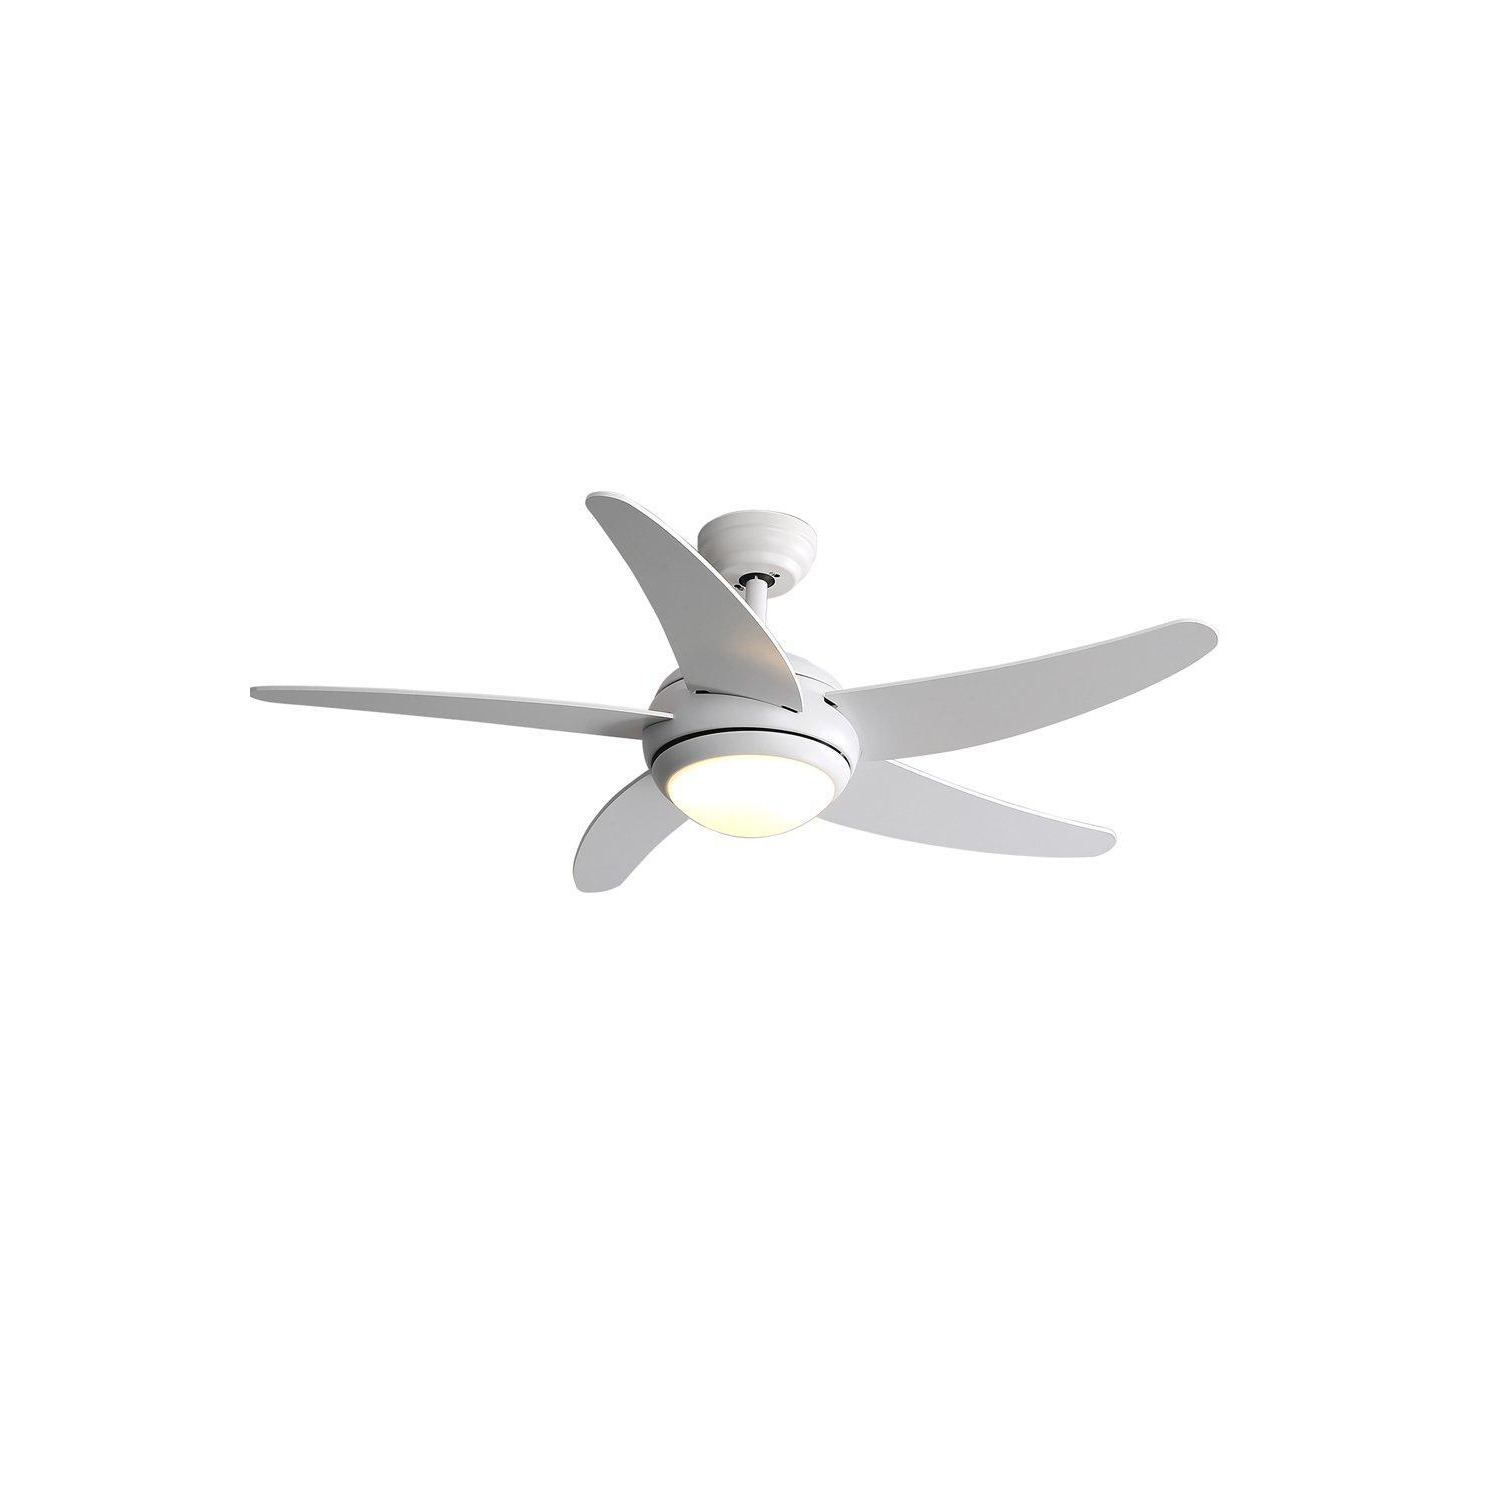 5-Blade LED Ceiling Fan with Light - image 1